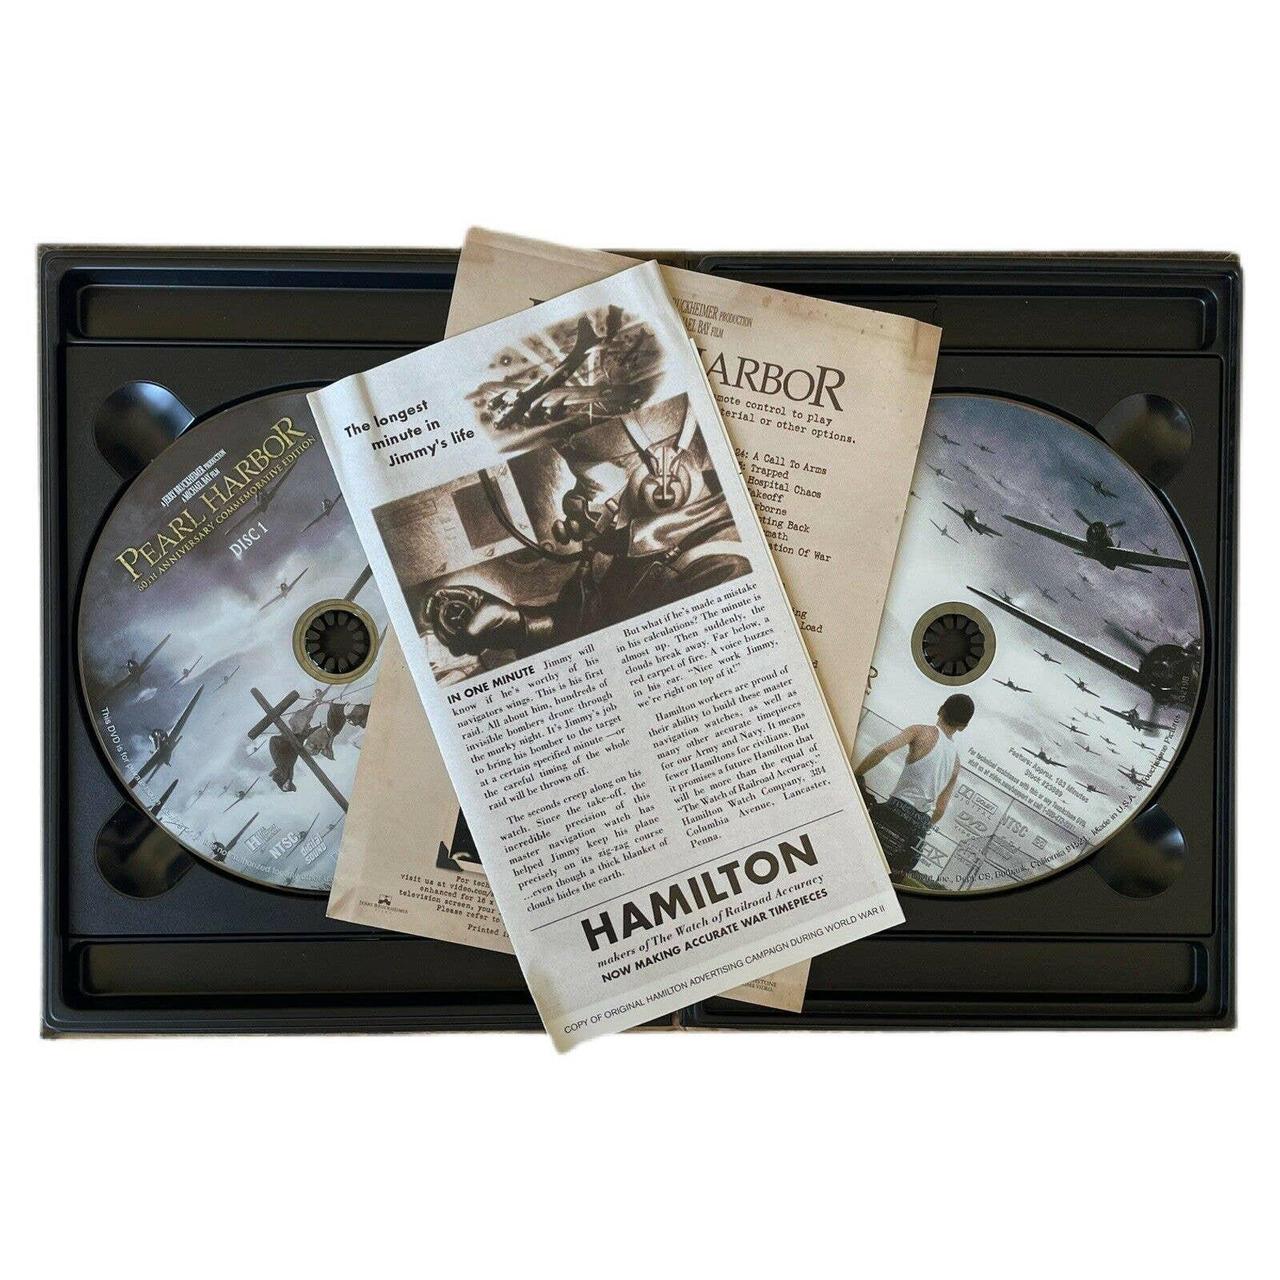 Product Image 2 - Pearl Harbor (DVD, 2001, 2-Disc